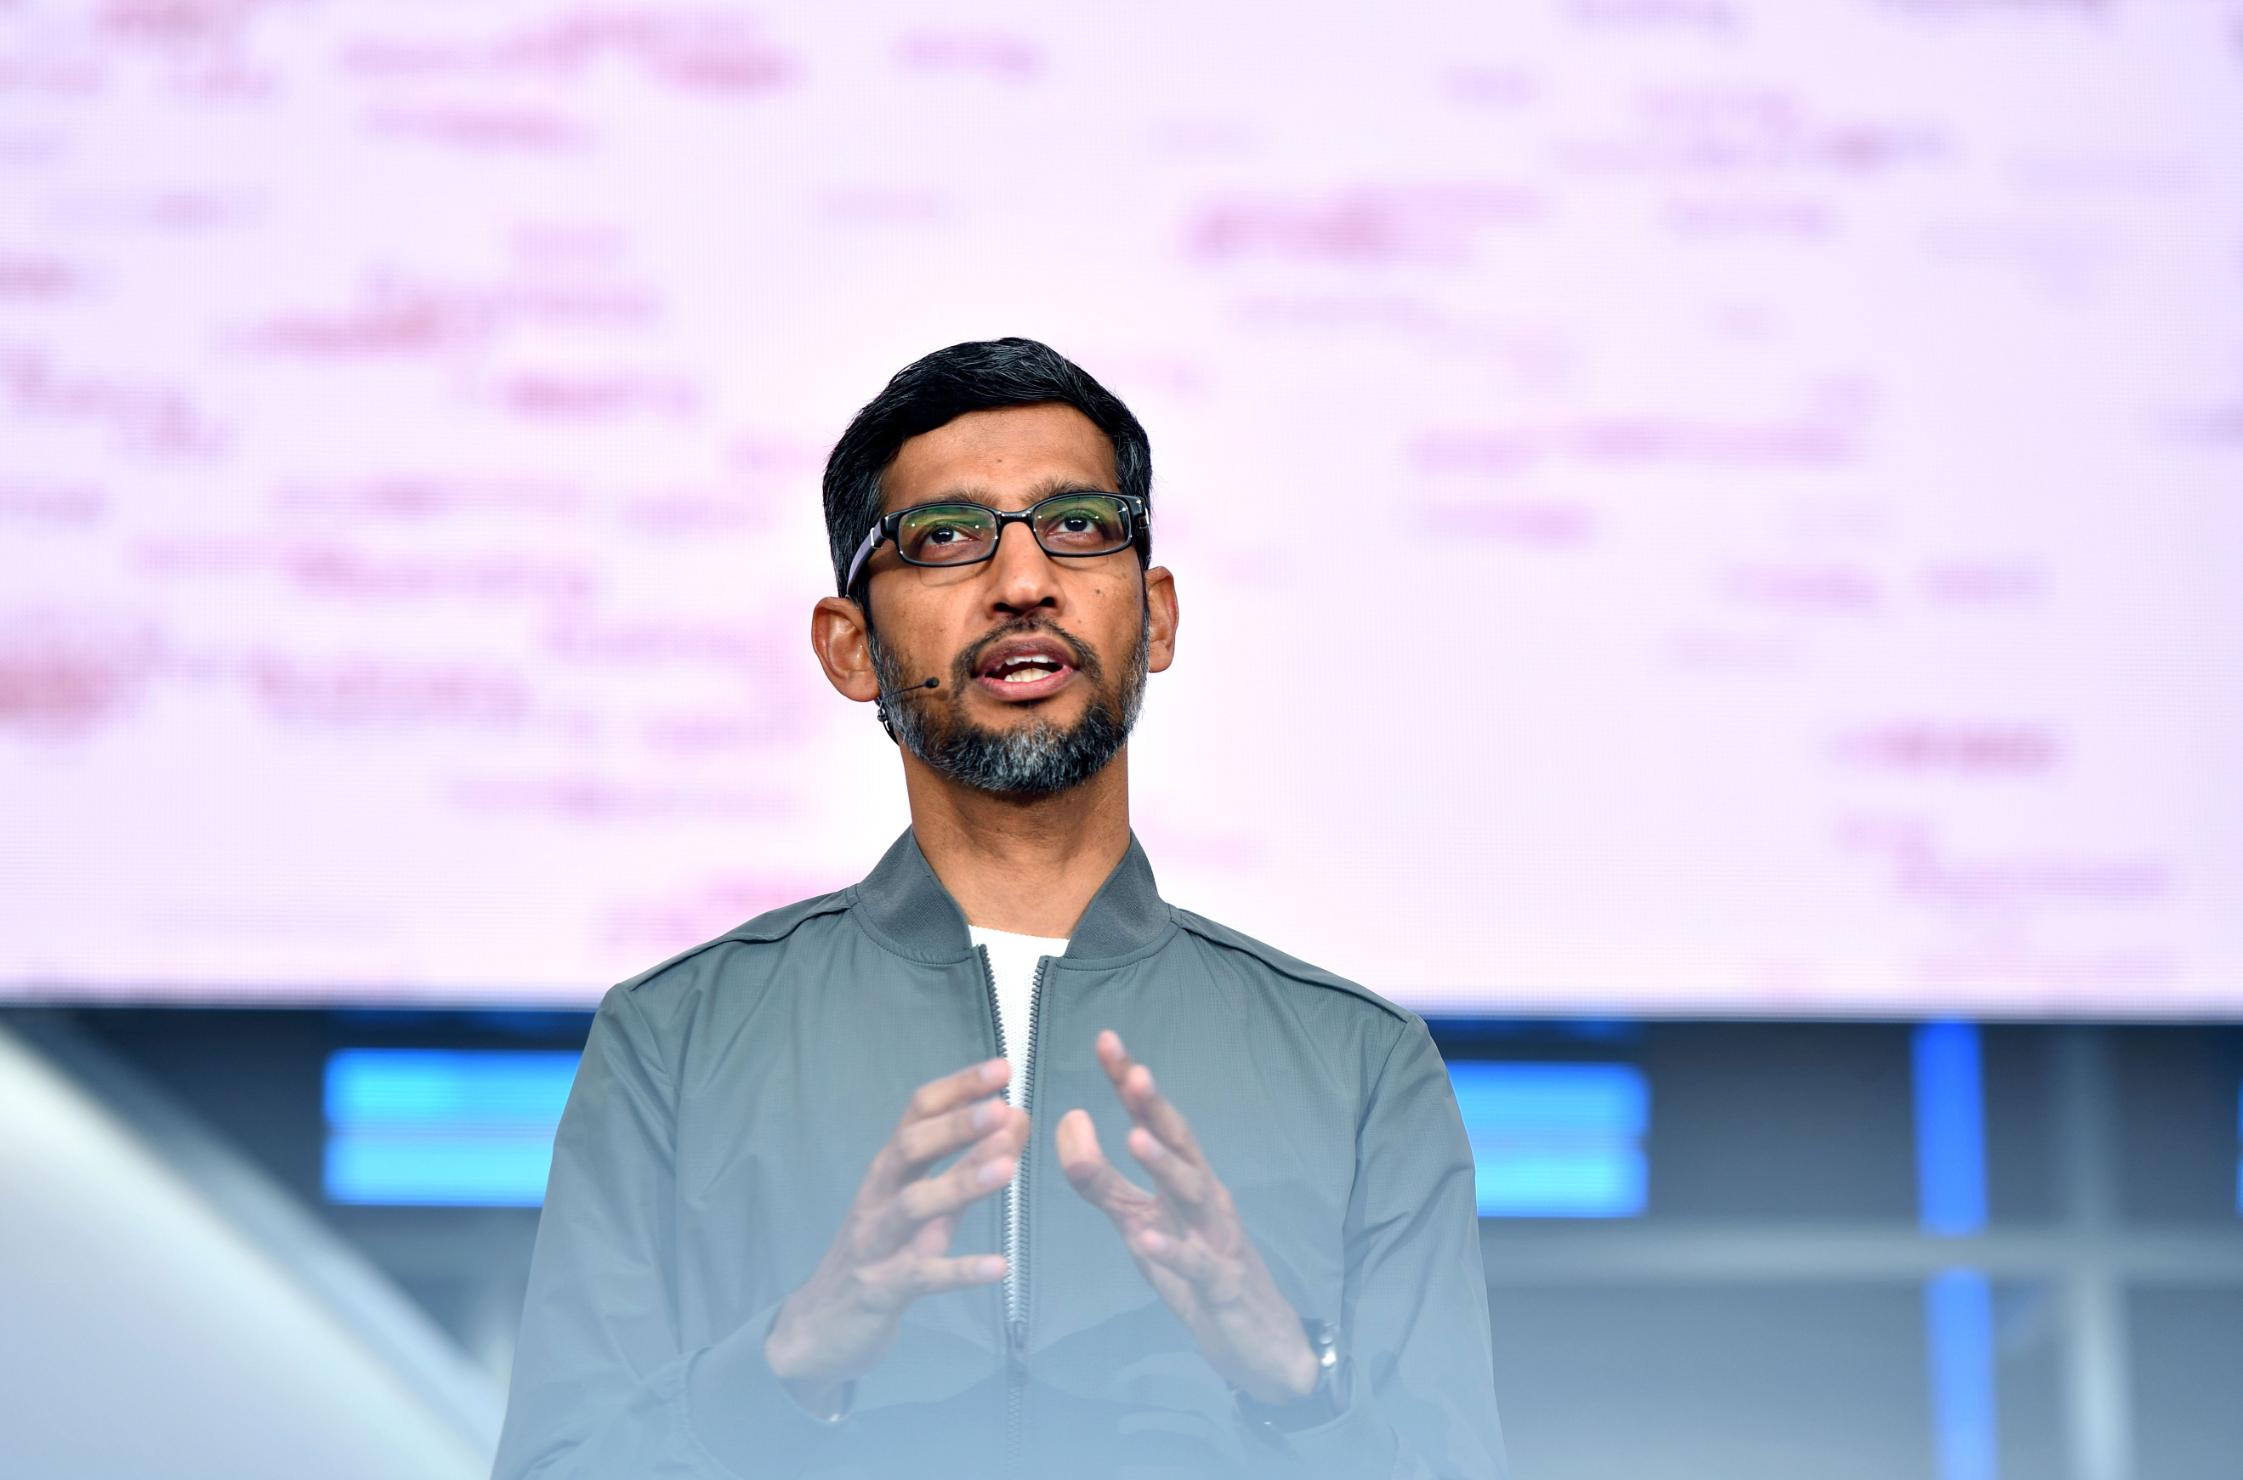 Google CEO Sundar Pichai speaks during the Google I/O keynote session at Shoreline Ampitheatre in Mountain View, California, on May 7, 2019.